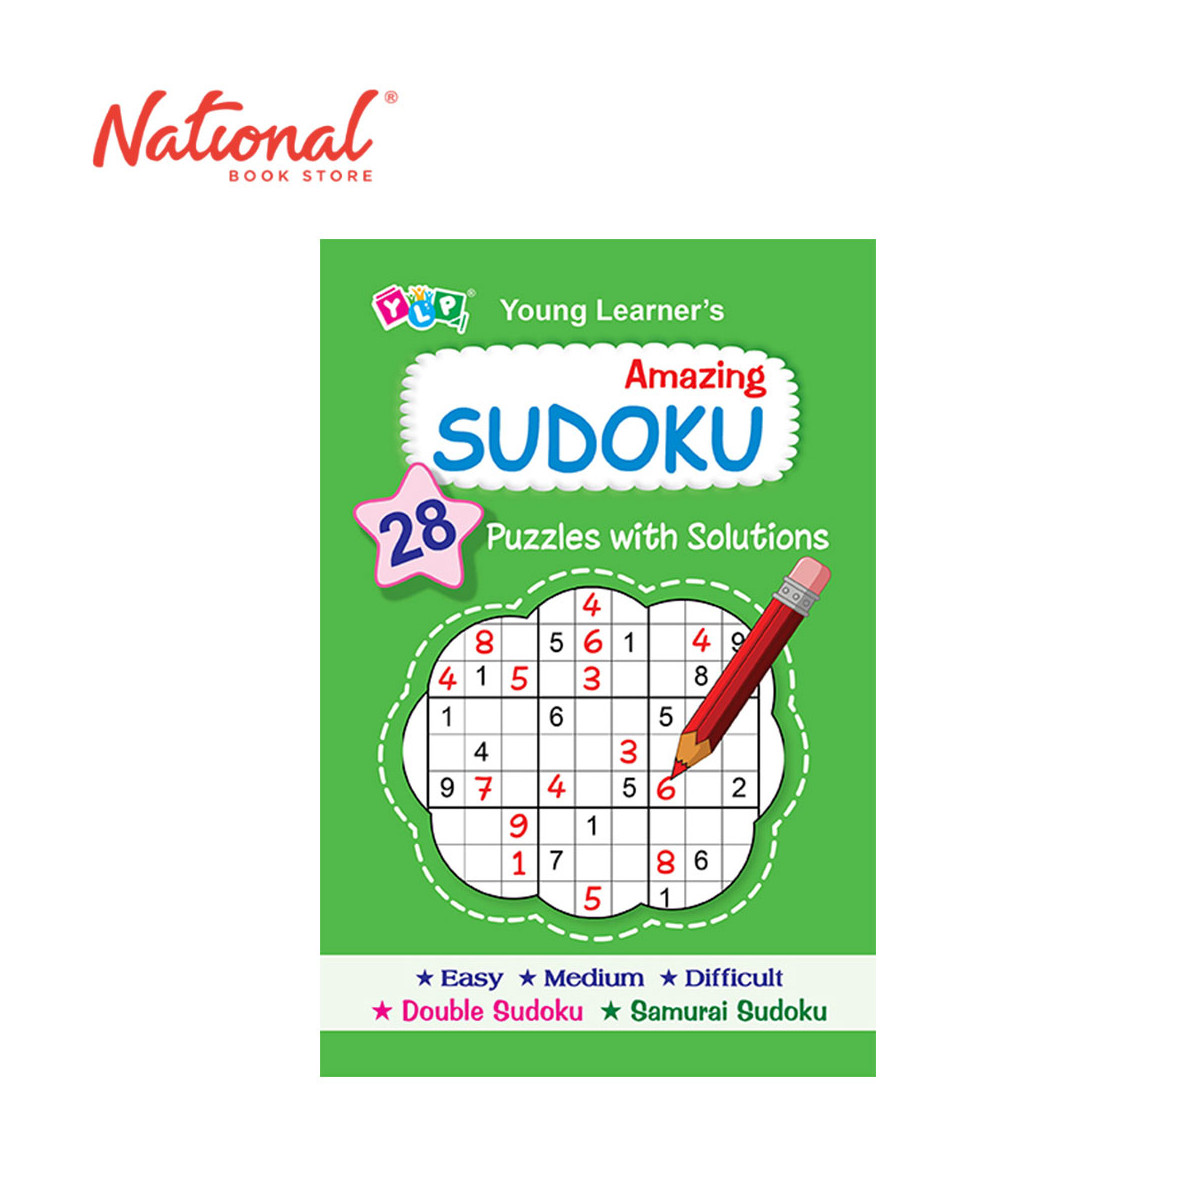 Young Learner's: Amazing Sudoku - Trade Paperback - Hobbies for Kids - Puzzles for Kids